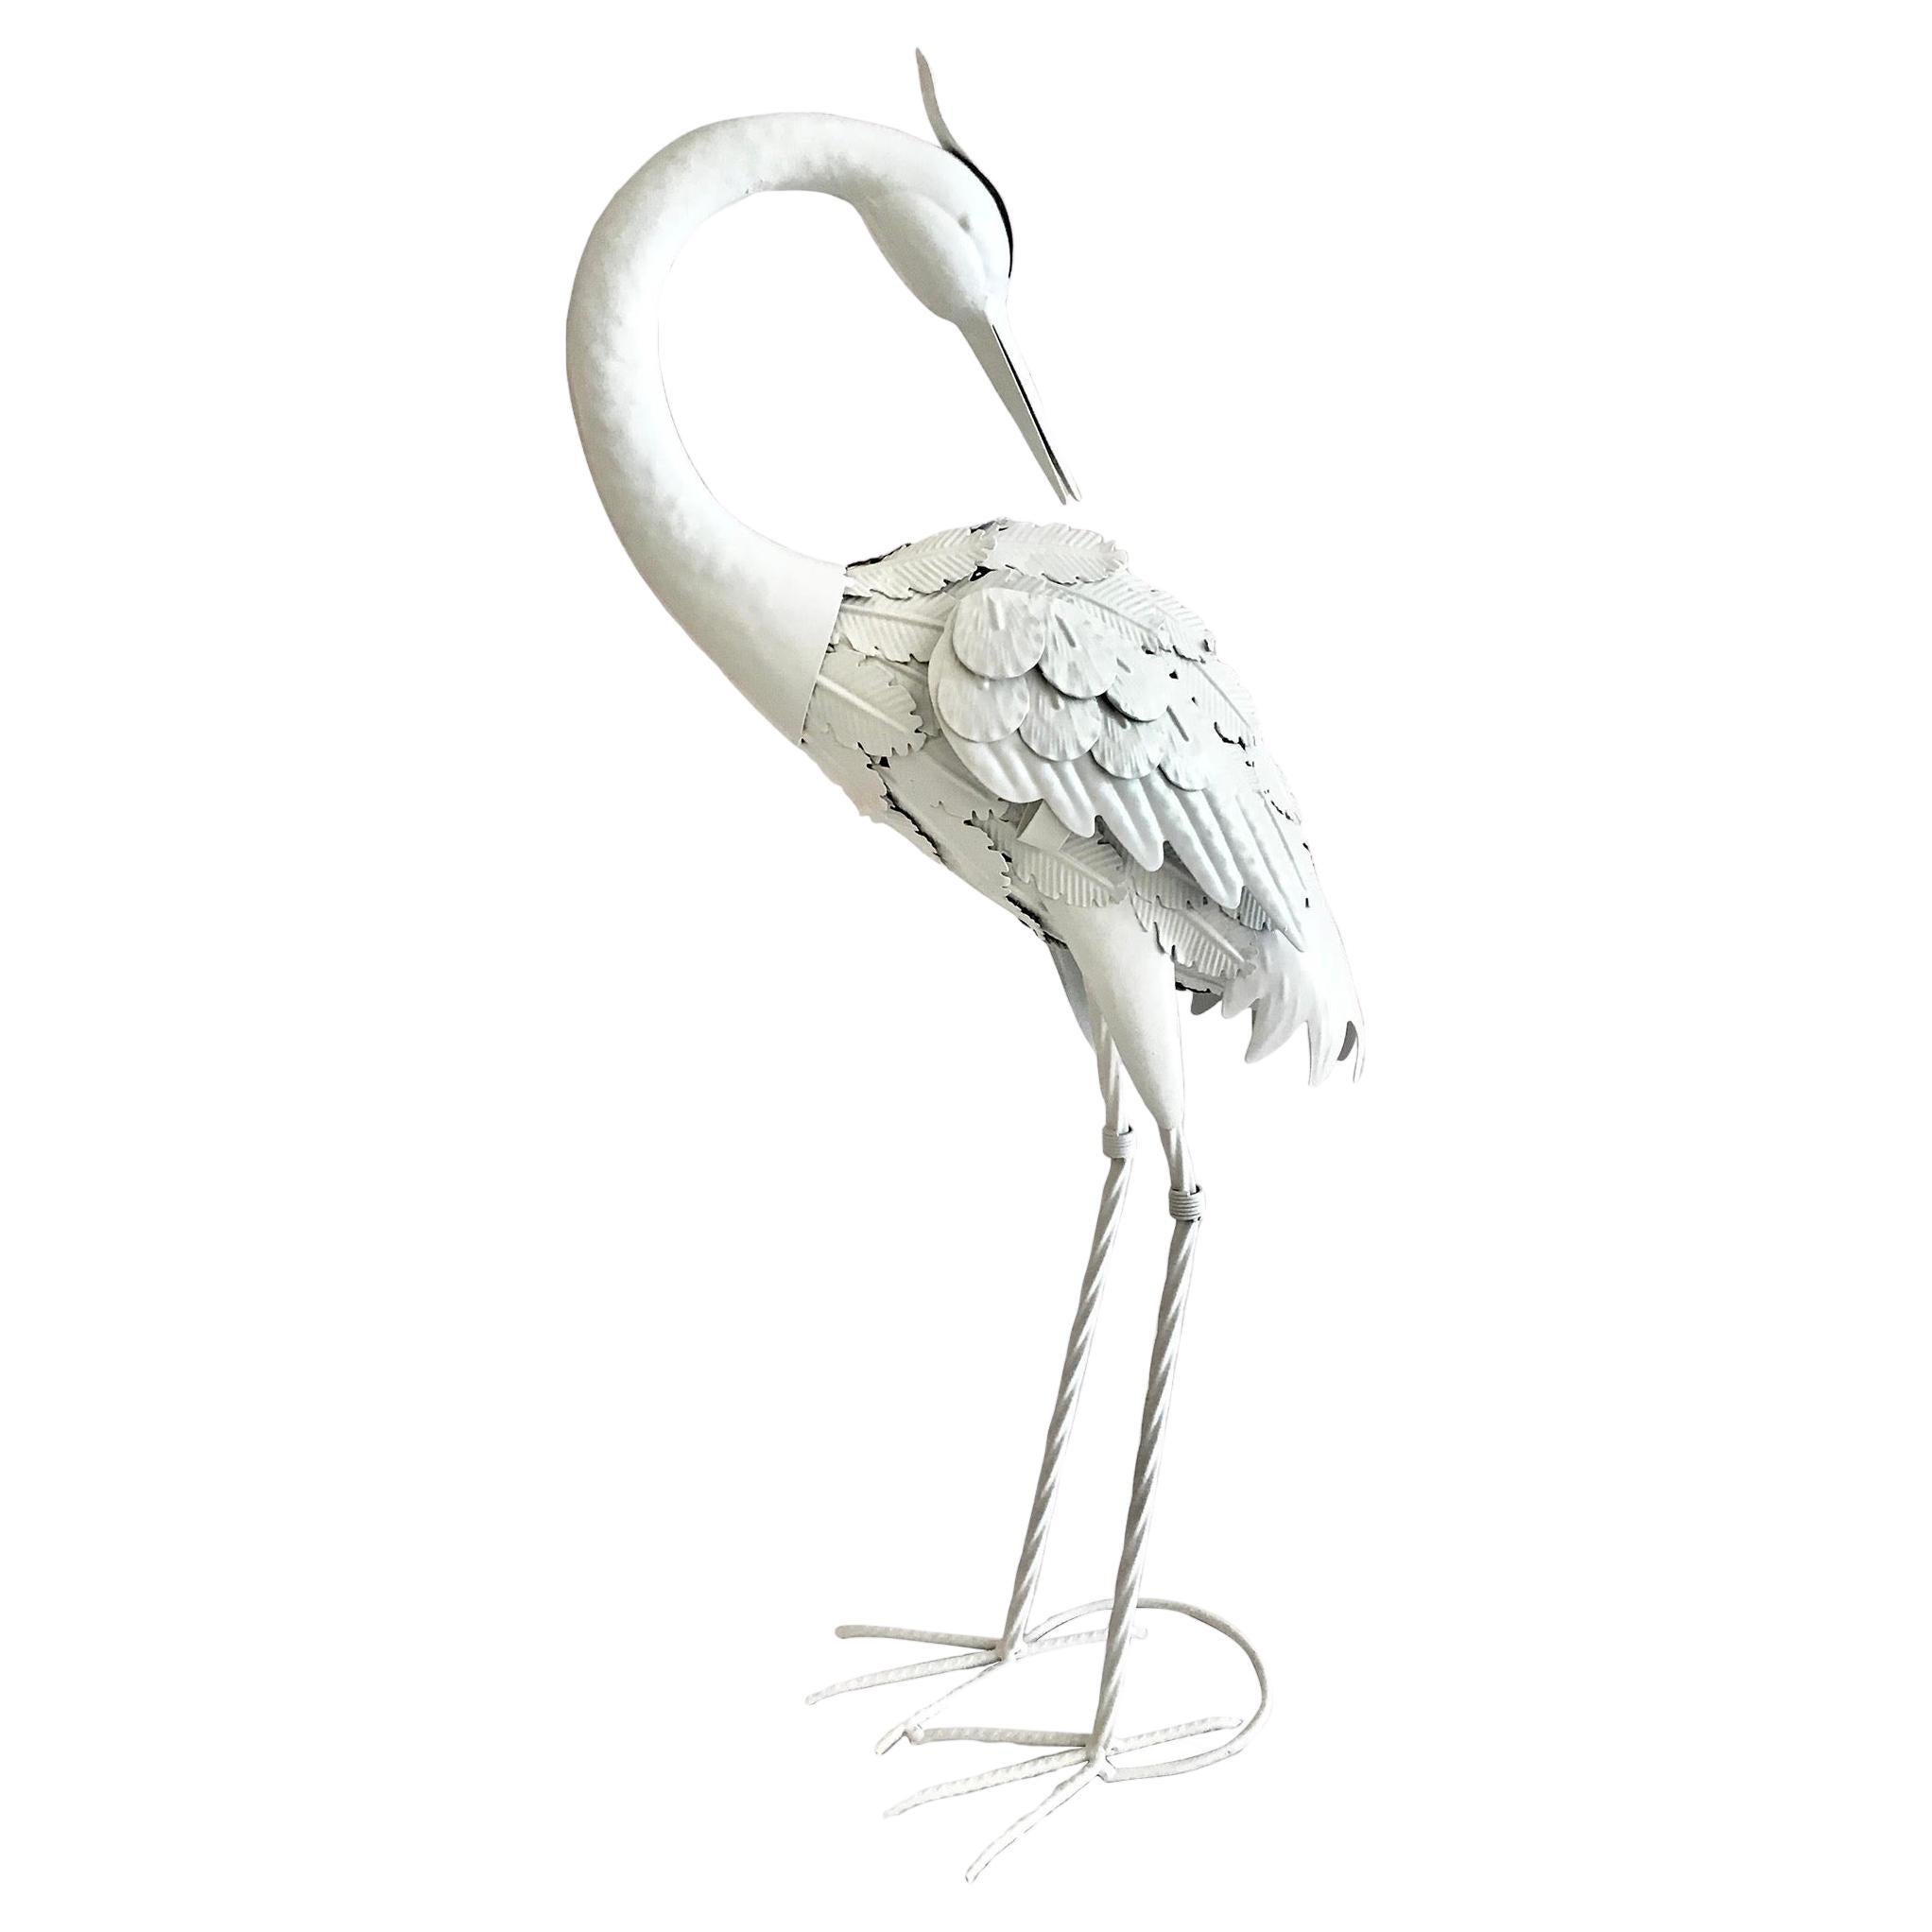 Small White Lacquered Metal Statue of a Stork Looking Back and Down